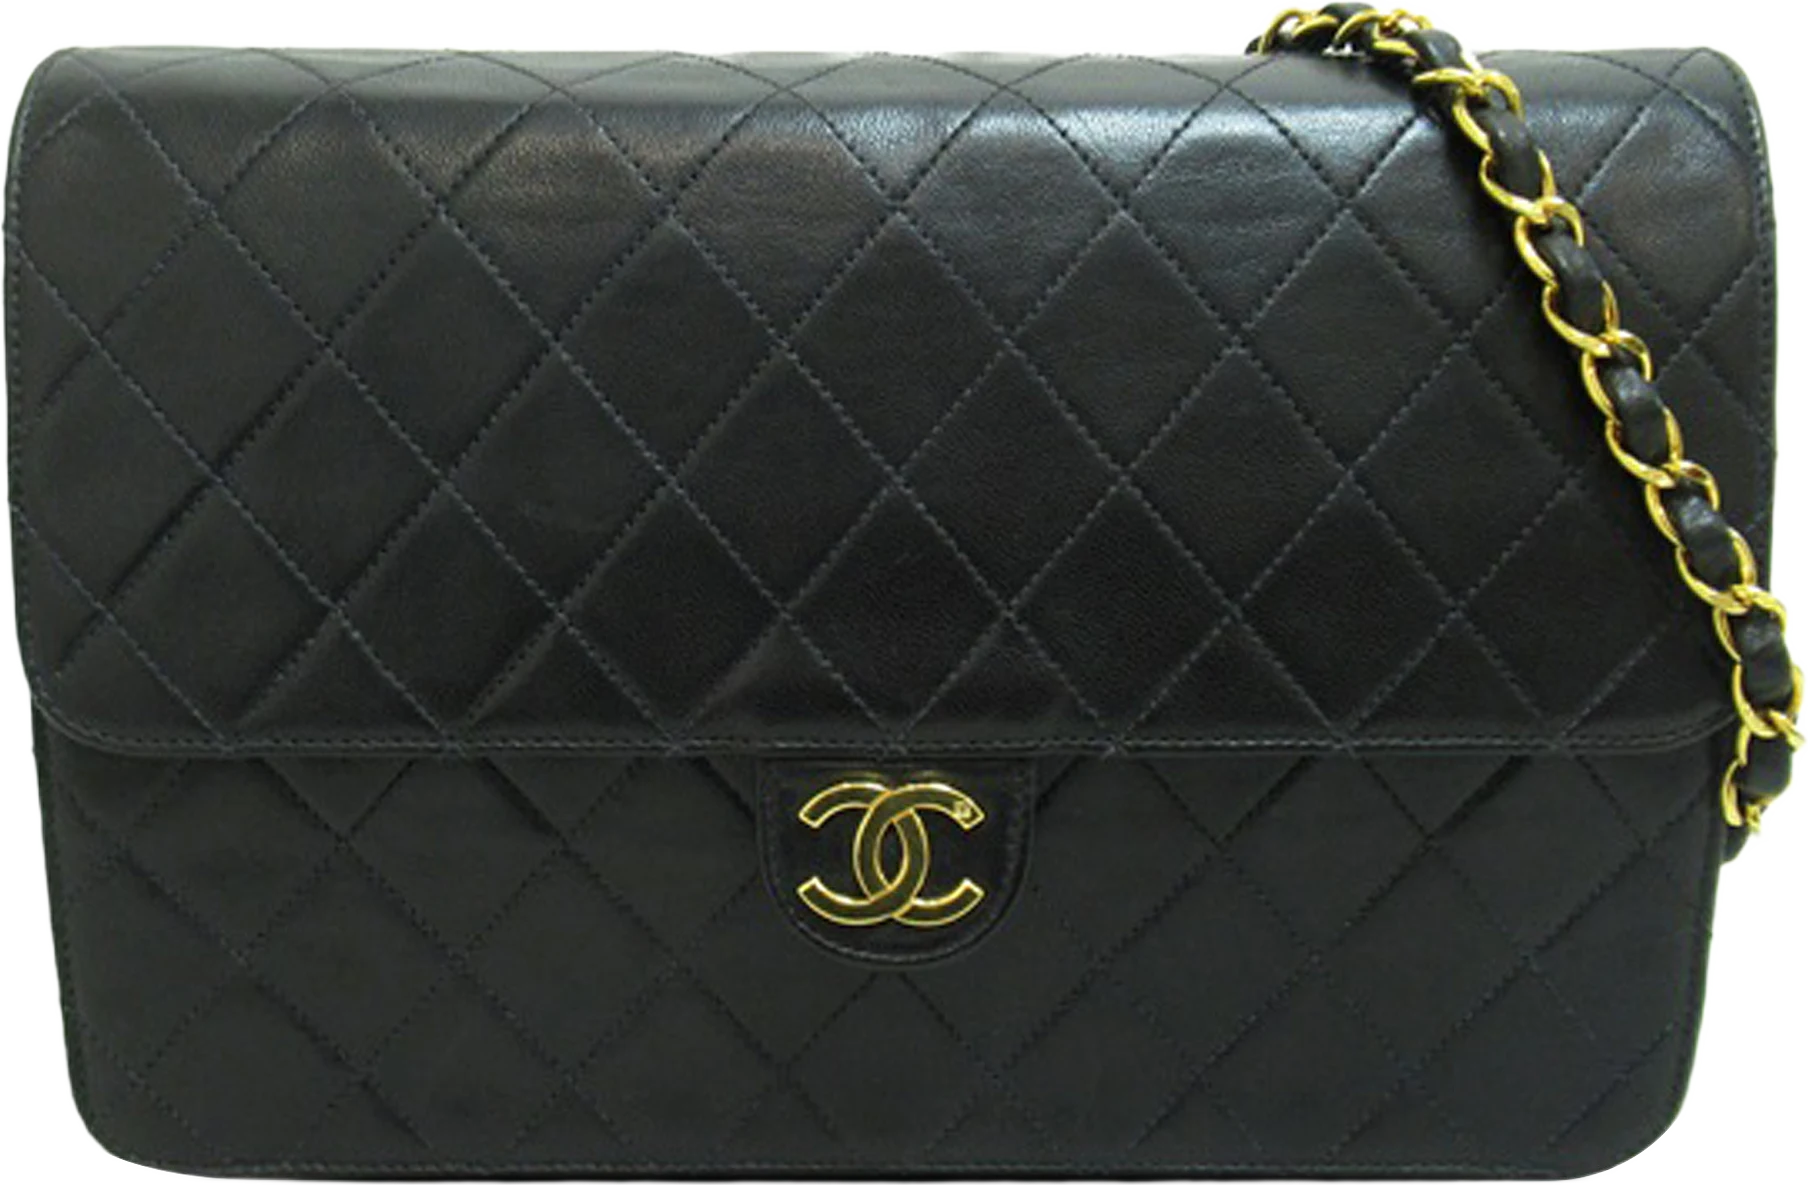 Chanel Cc Quilted Lambskin Single Flap